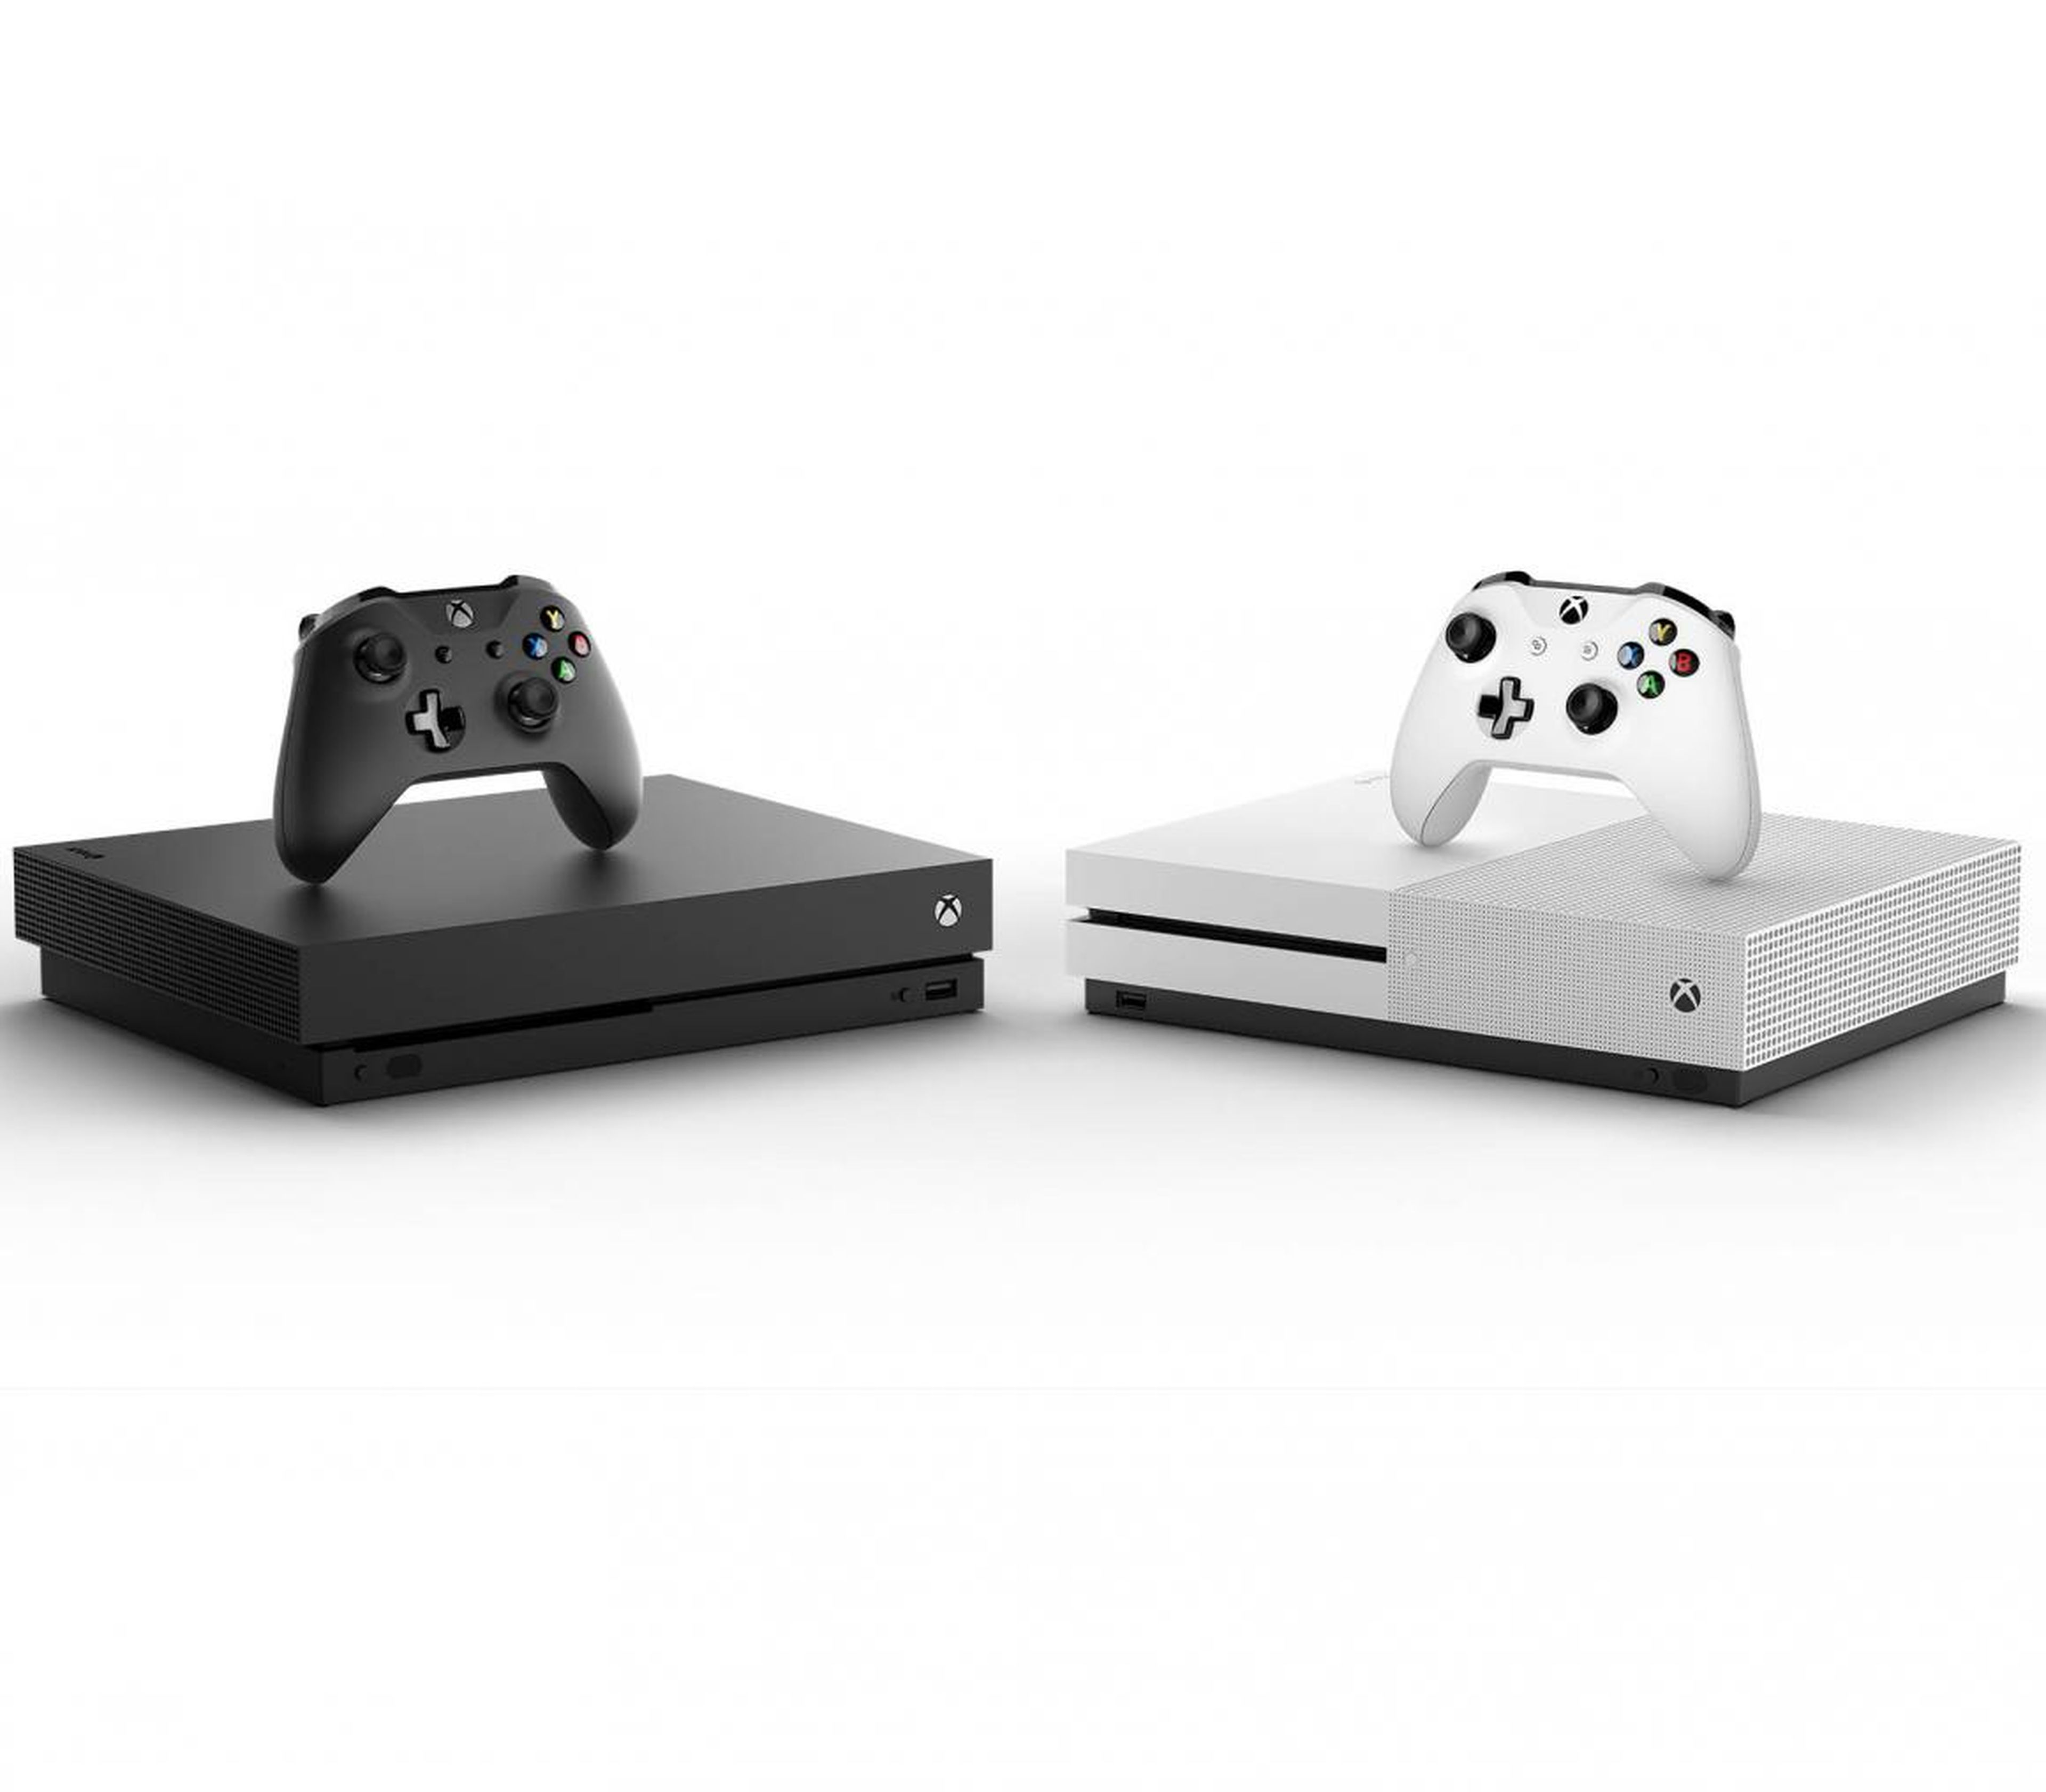 Microsoft currently offers two versions of its console, the Xbox One X, left, and the Xbox One S.